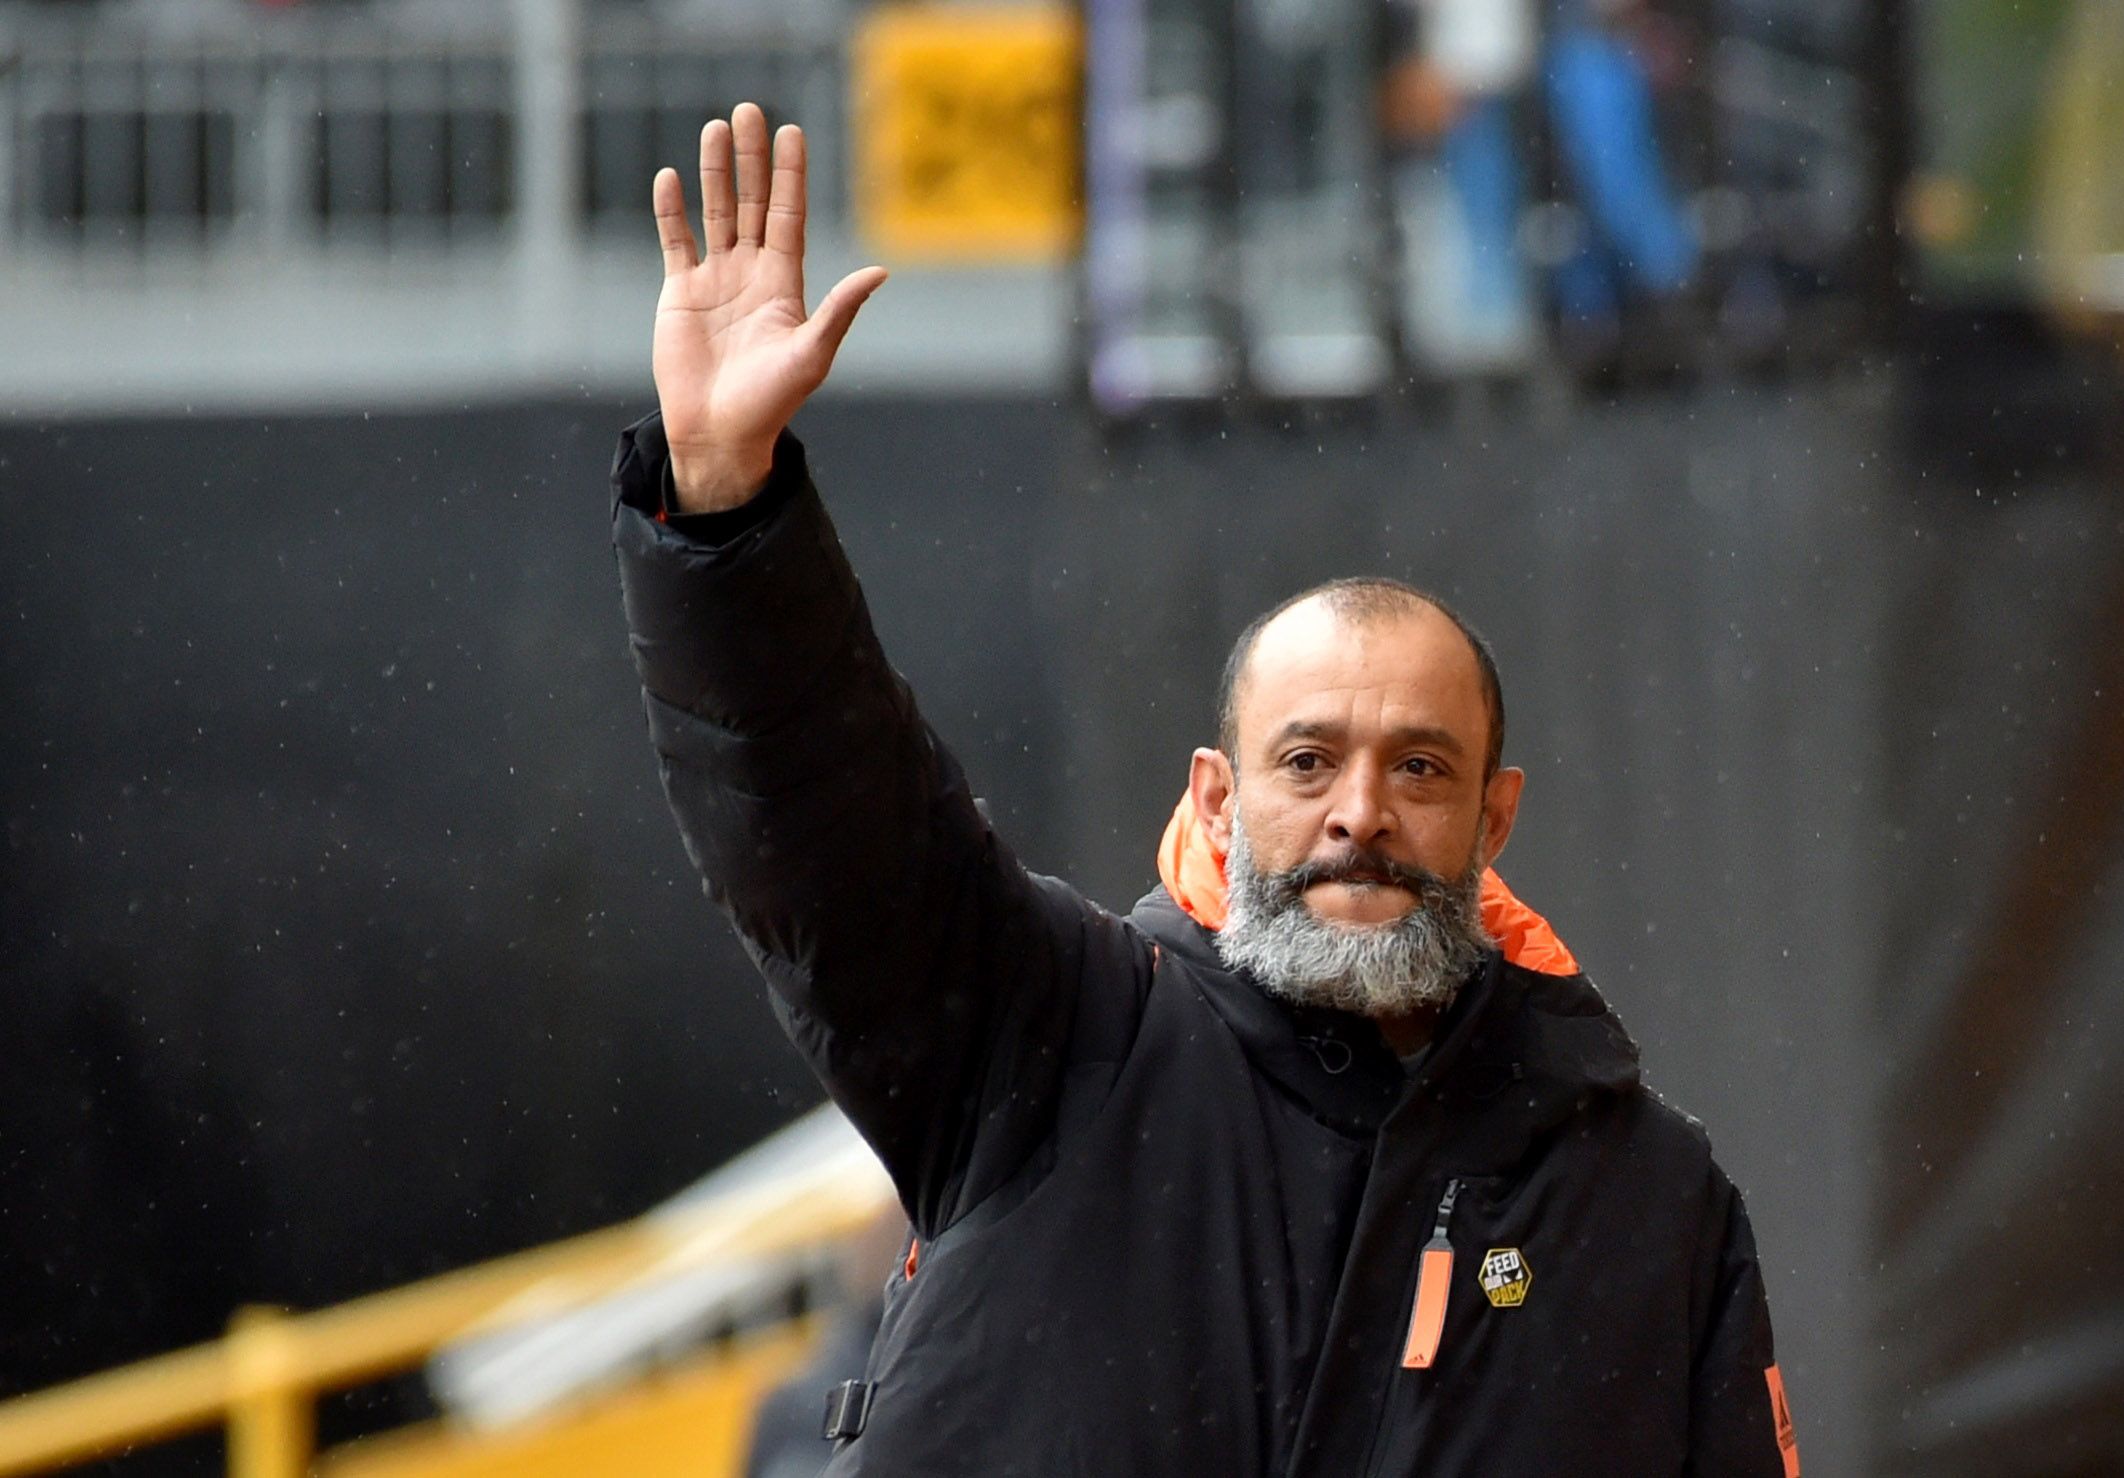 Soccer Football - Premier League - Wolverhampton Wanderers v Manchester United - Molineux Stadium, Wolverhampton, Britain - May 23, 2021 Wolverhampton Wanderers manager Nuno Espirito Santo before the match Pool via REUTERS/Rui Vieira EDITORIAL USE ONLY. No use with unauthorized audio, video, data, fixture lists, club/league logos or 'live' services. Online in-match use limited to 75 images, no video emulation. No use in betting, games or single club /league/player publications.  Please contact y